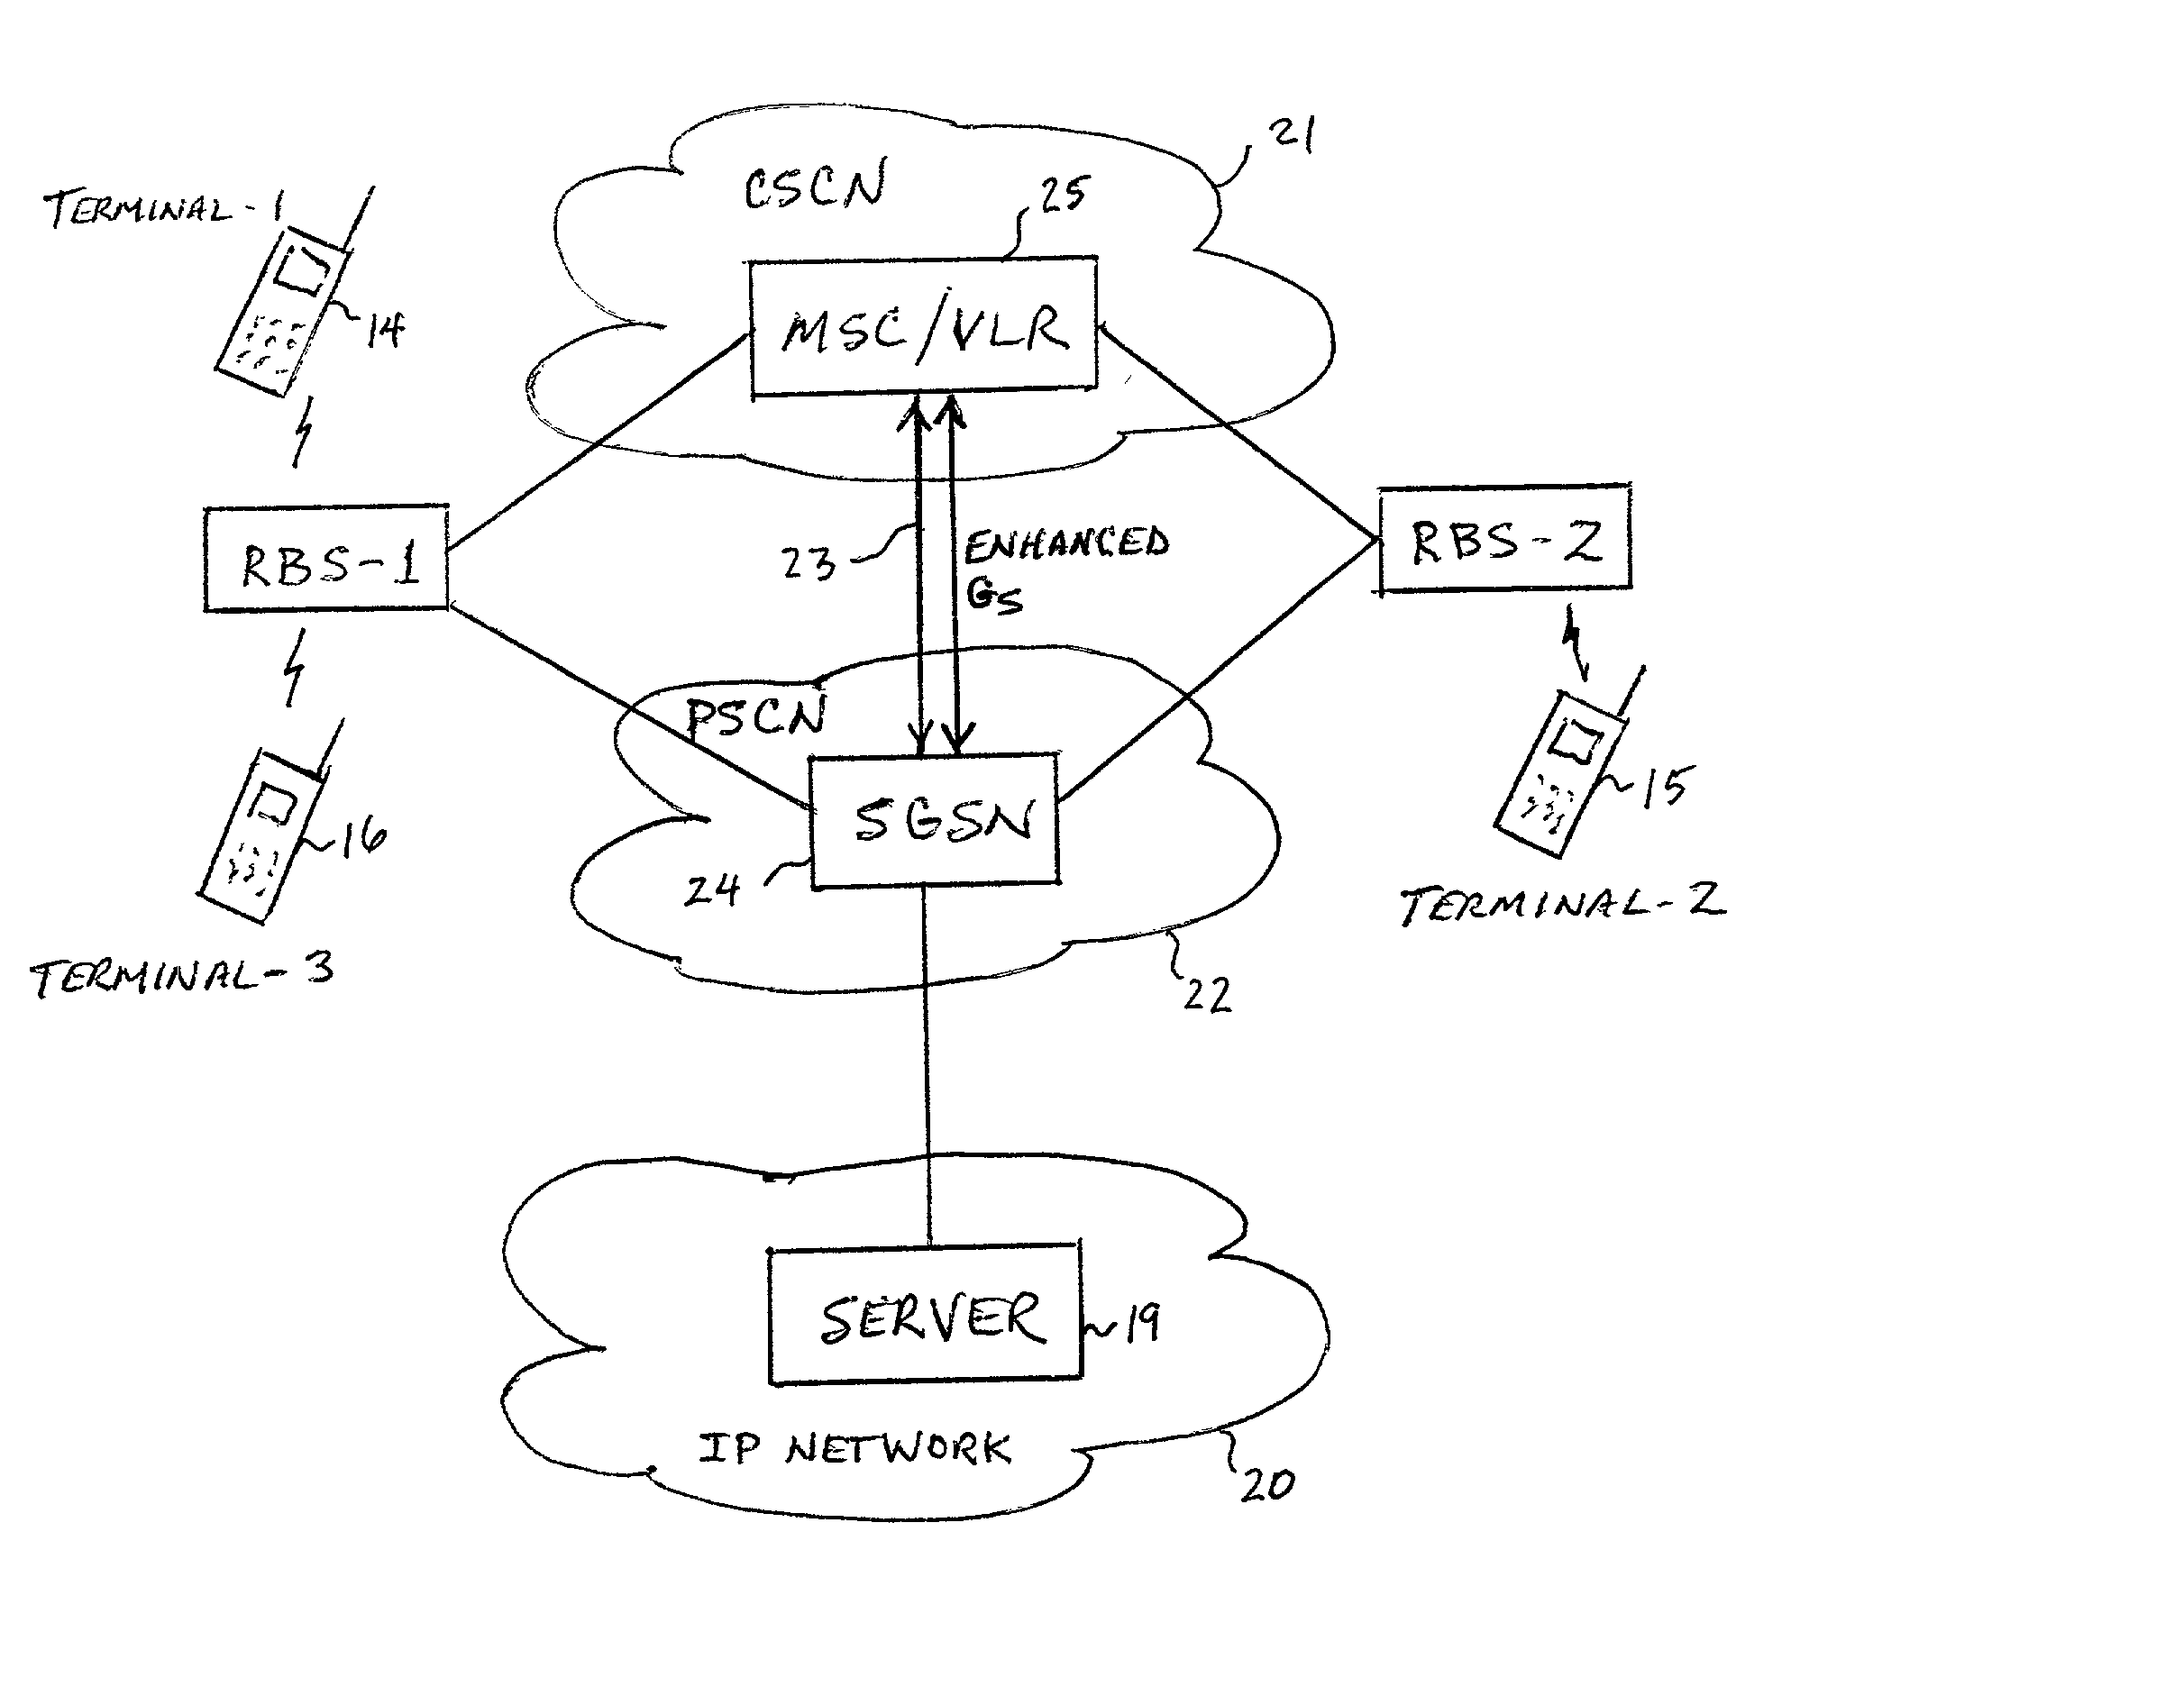 System and method in a wireless telecommunication network for placing a voice call on hold and conducting a data session